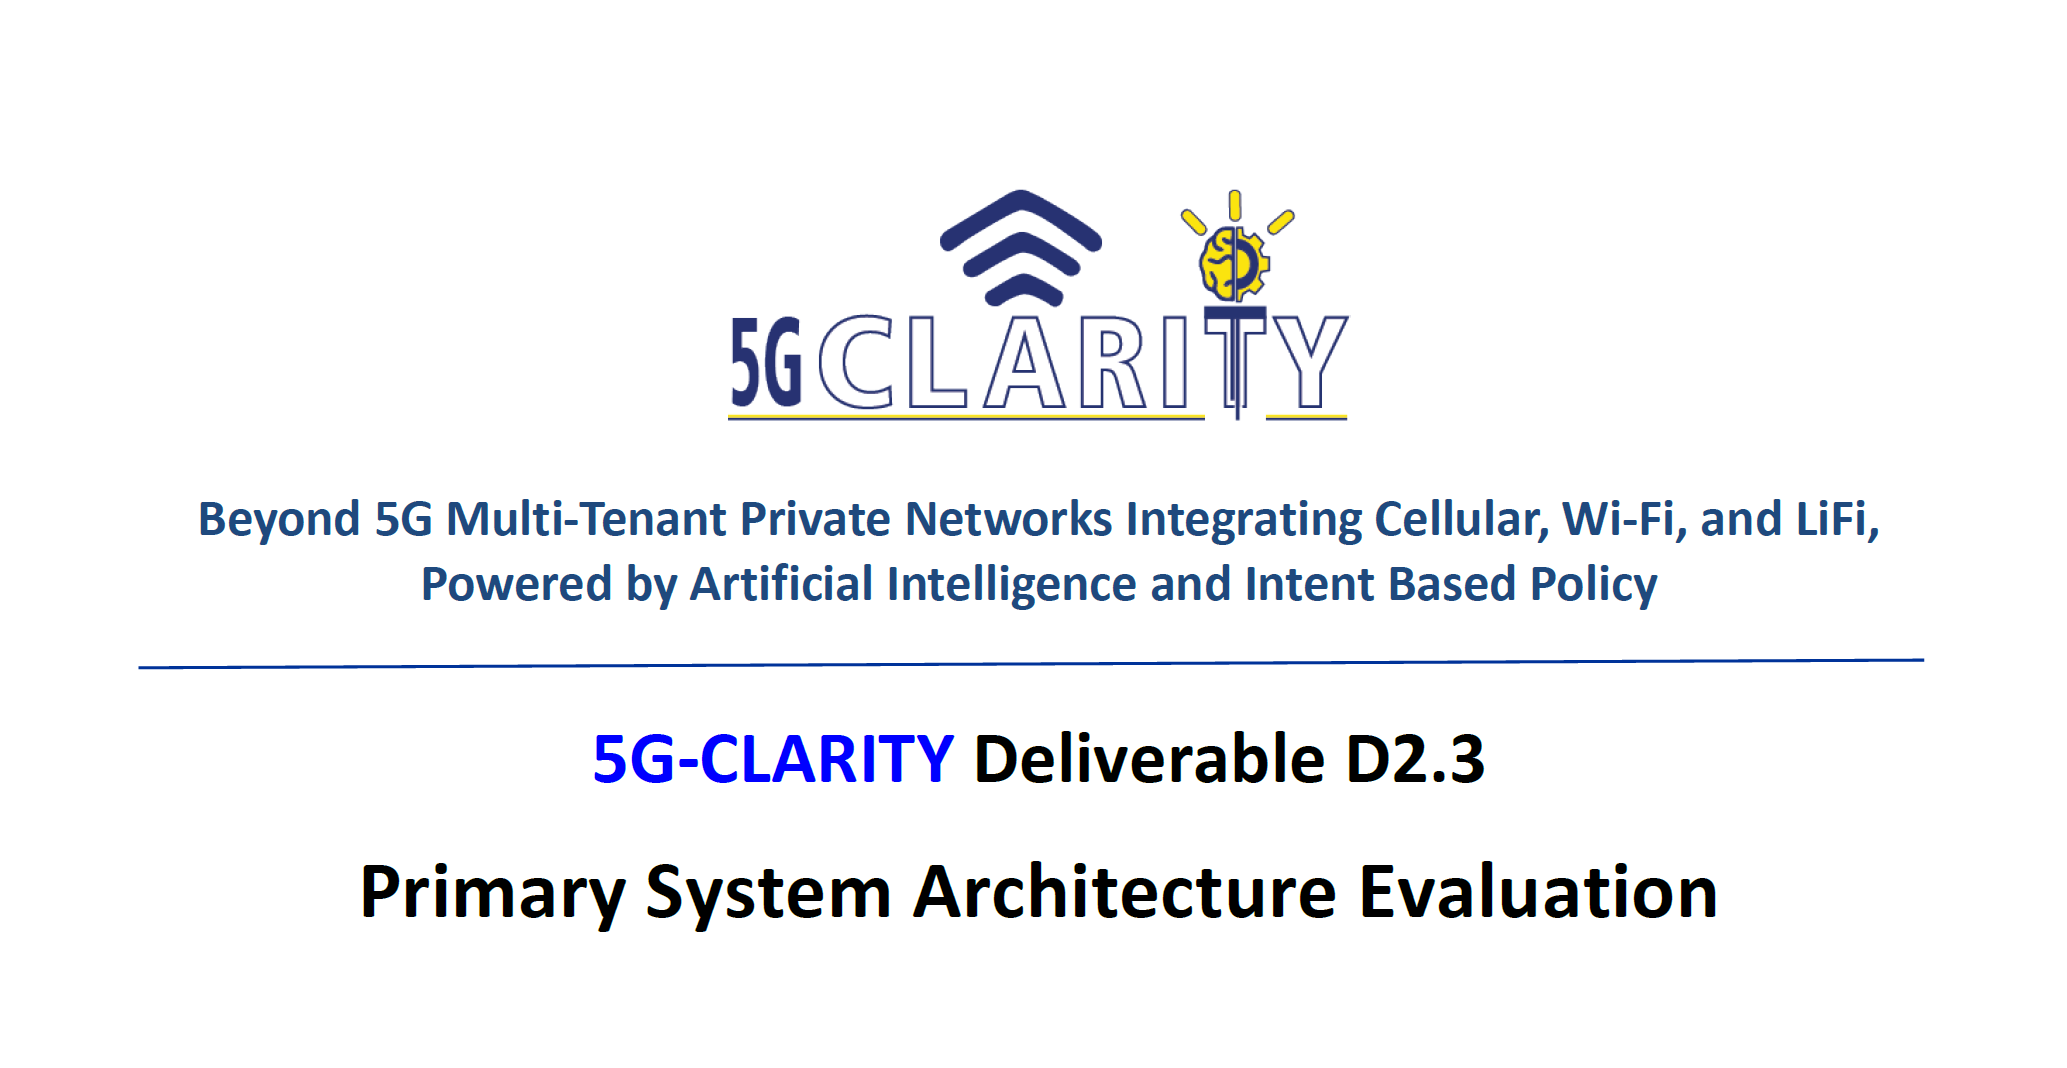 Primary evaluation of 5G-CLARITY architecture is now available to public!